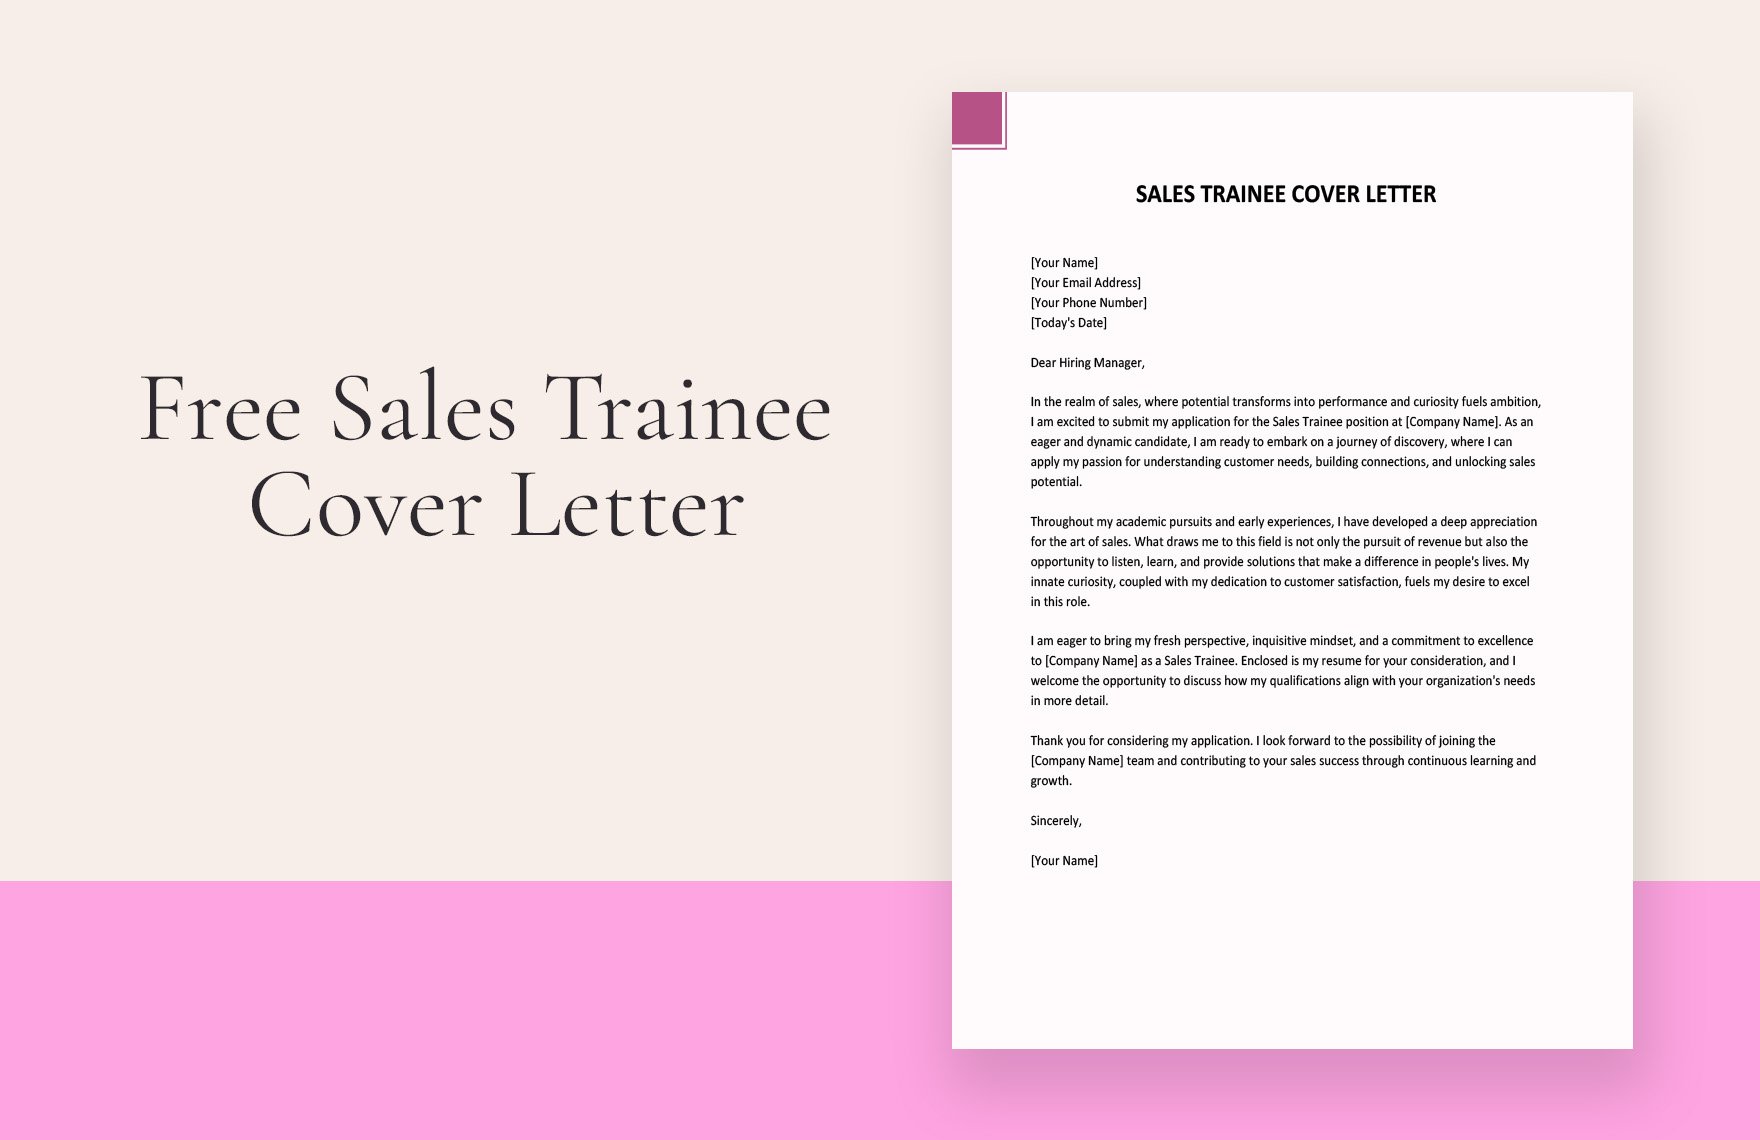 Sales Trainee Cover Letter in Word, Google Docs